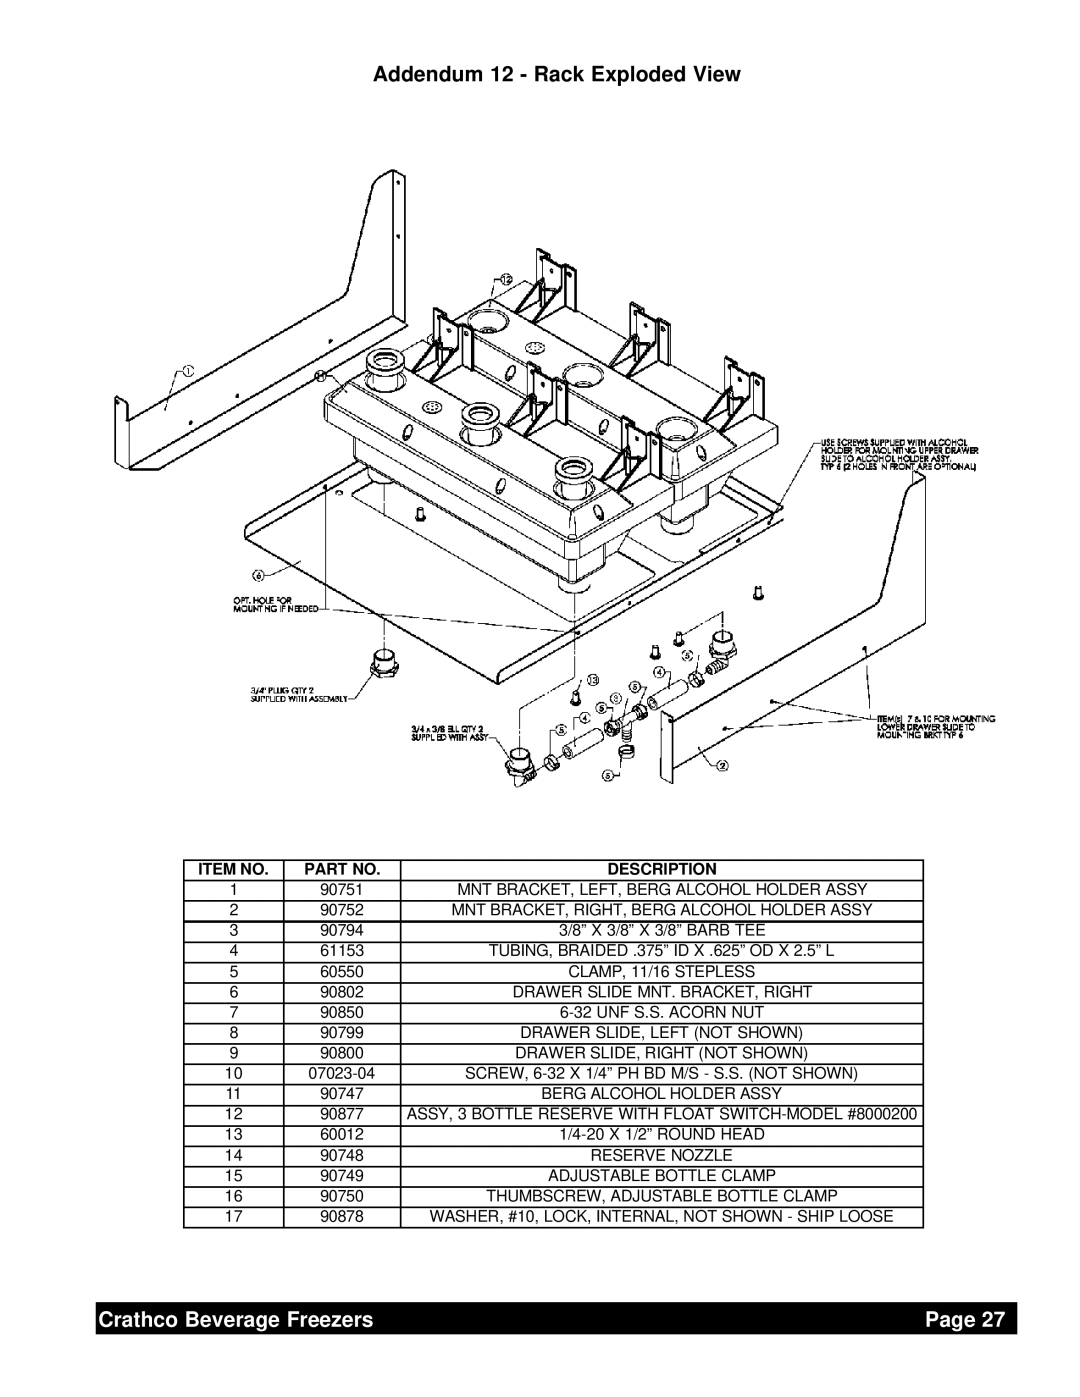 Grindmaster 6321L service manual Addendum 12 - Rack Exploded View, Crathco Beverage Freezers, Page 